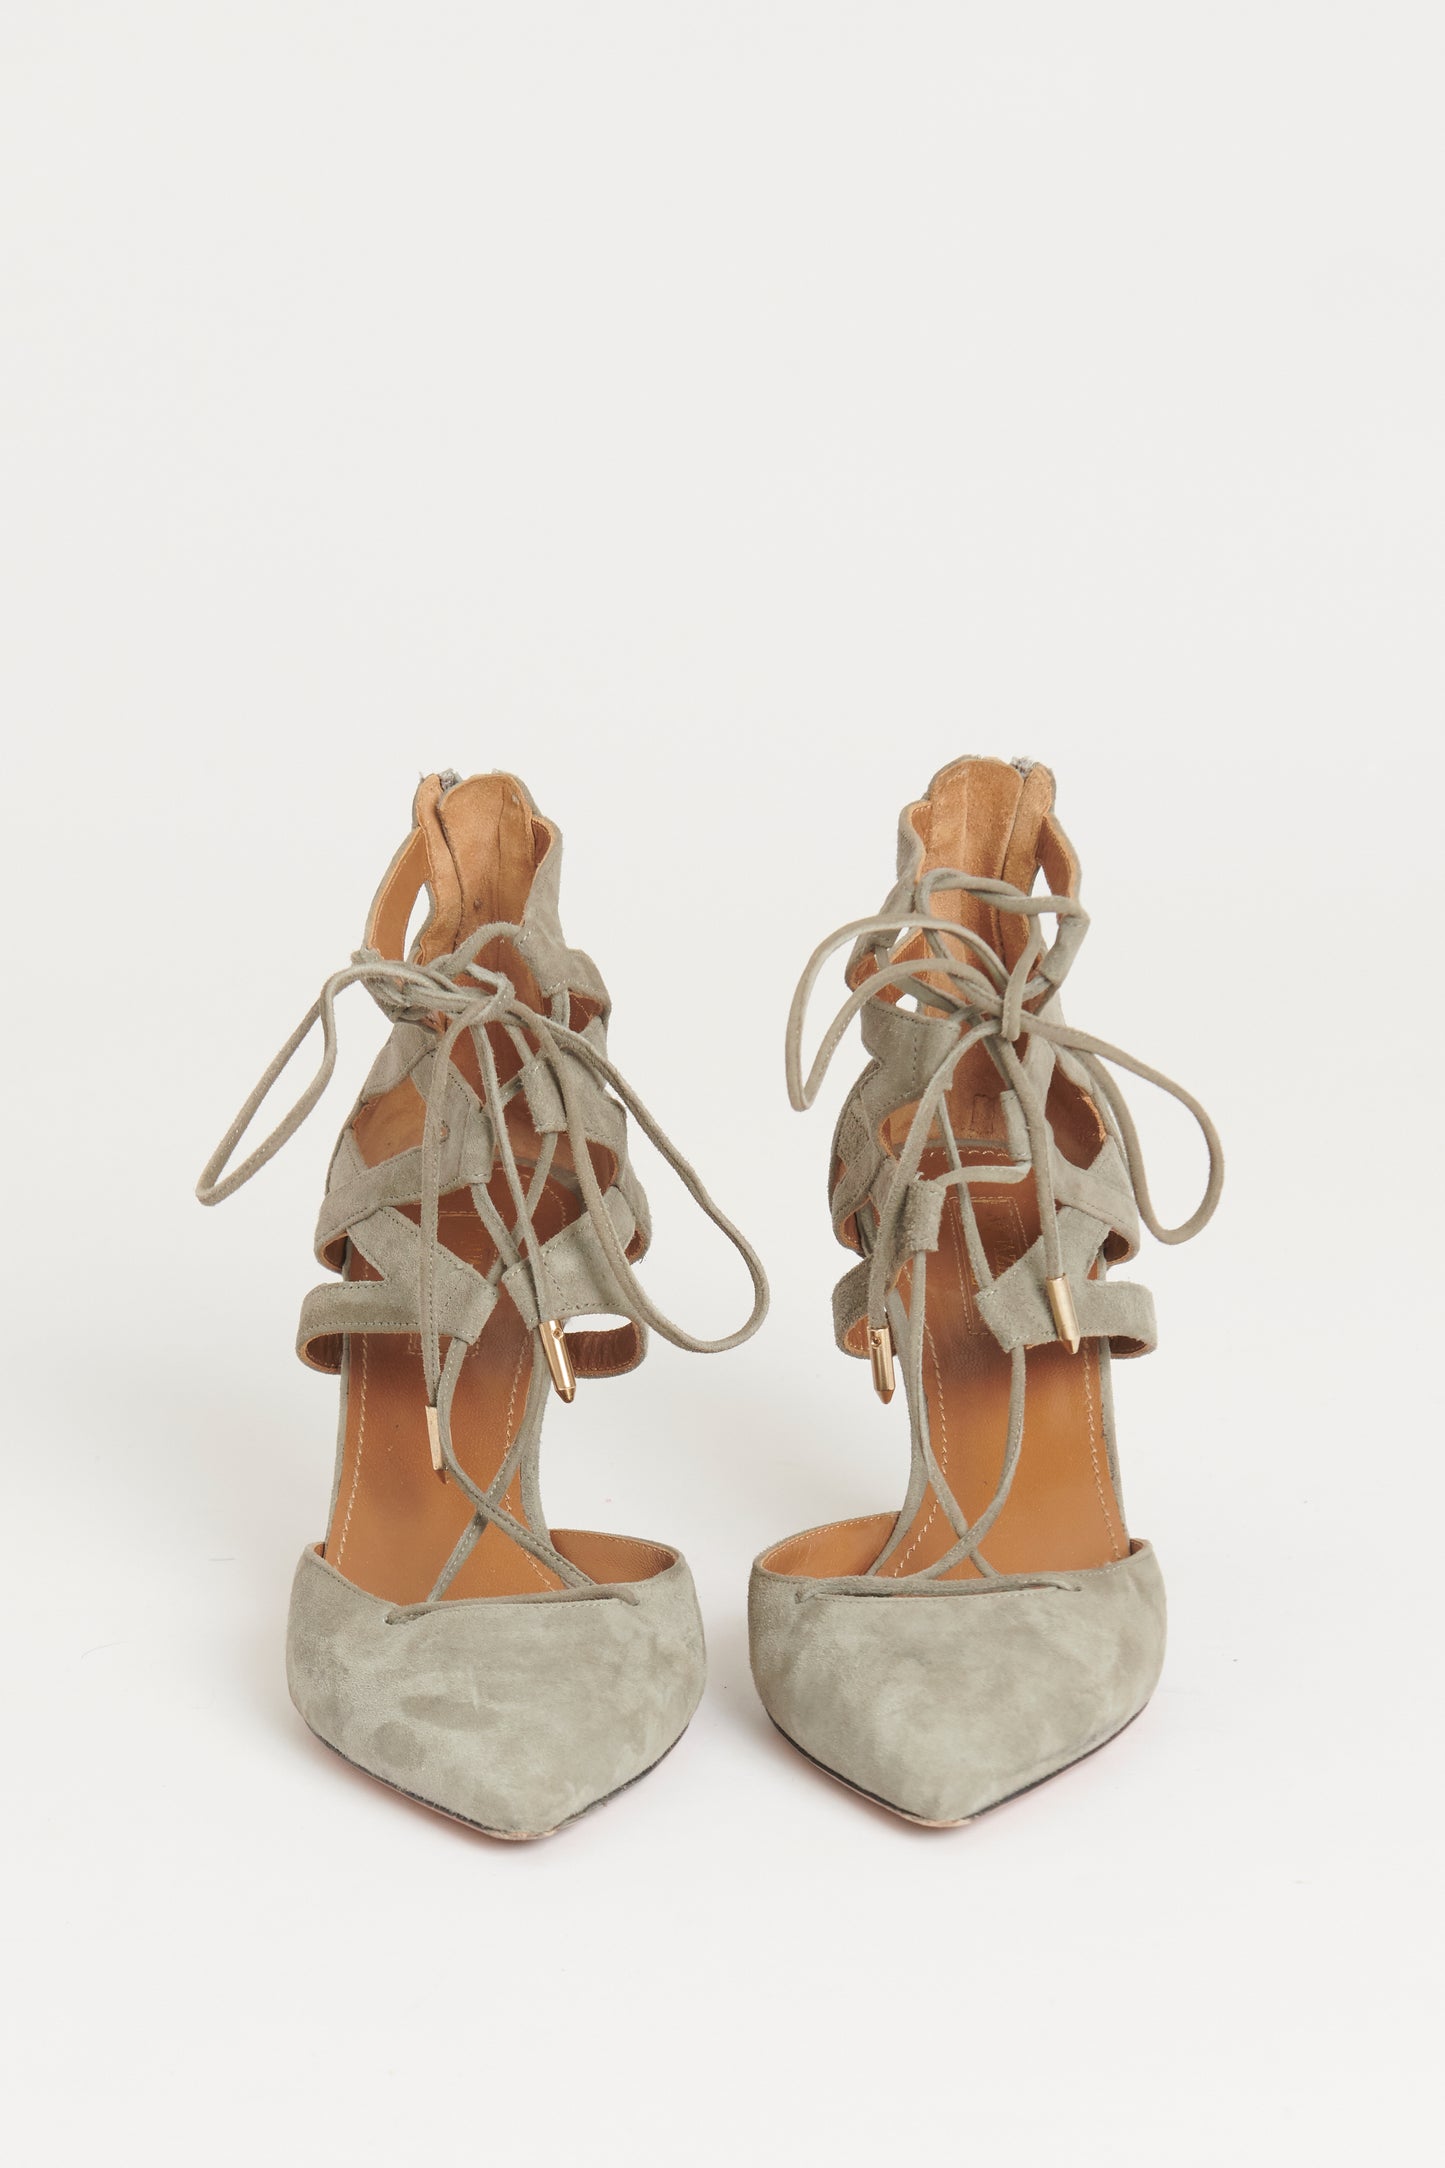 Belgravia Grey Suede Lace Up Preowned Heels